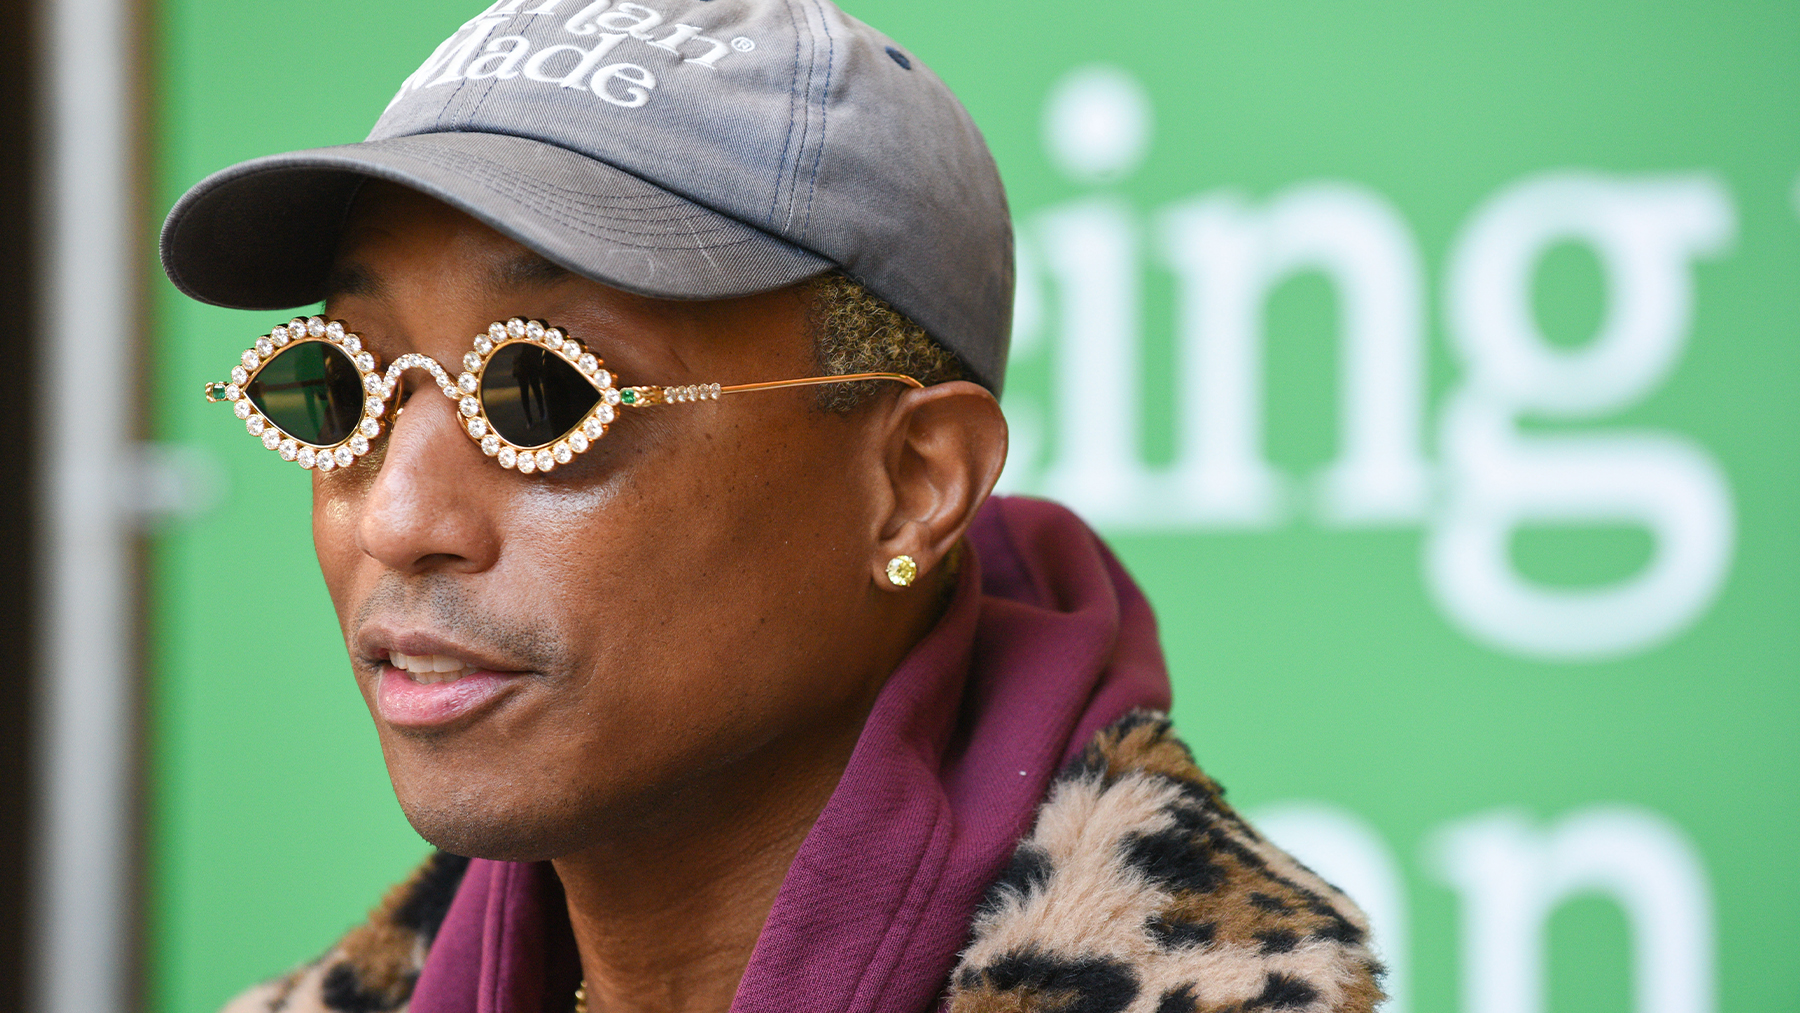 Pharrell Williams wears Mughalera inspired diamond sunglasses triggers  cultural appropriation row  Lifestyle NewsThe Indian Express